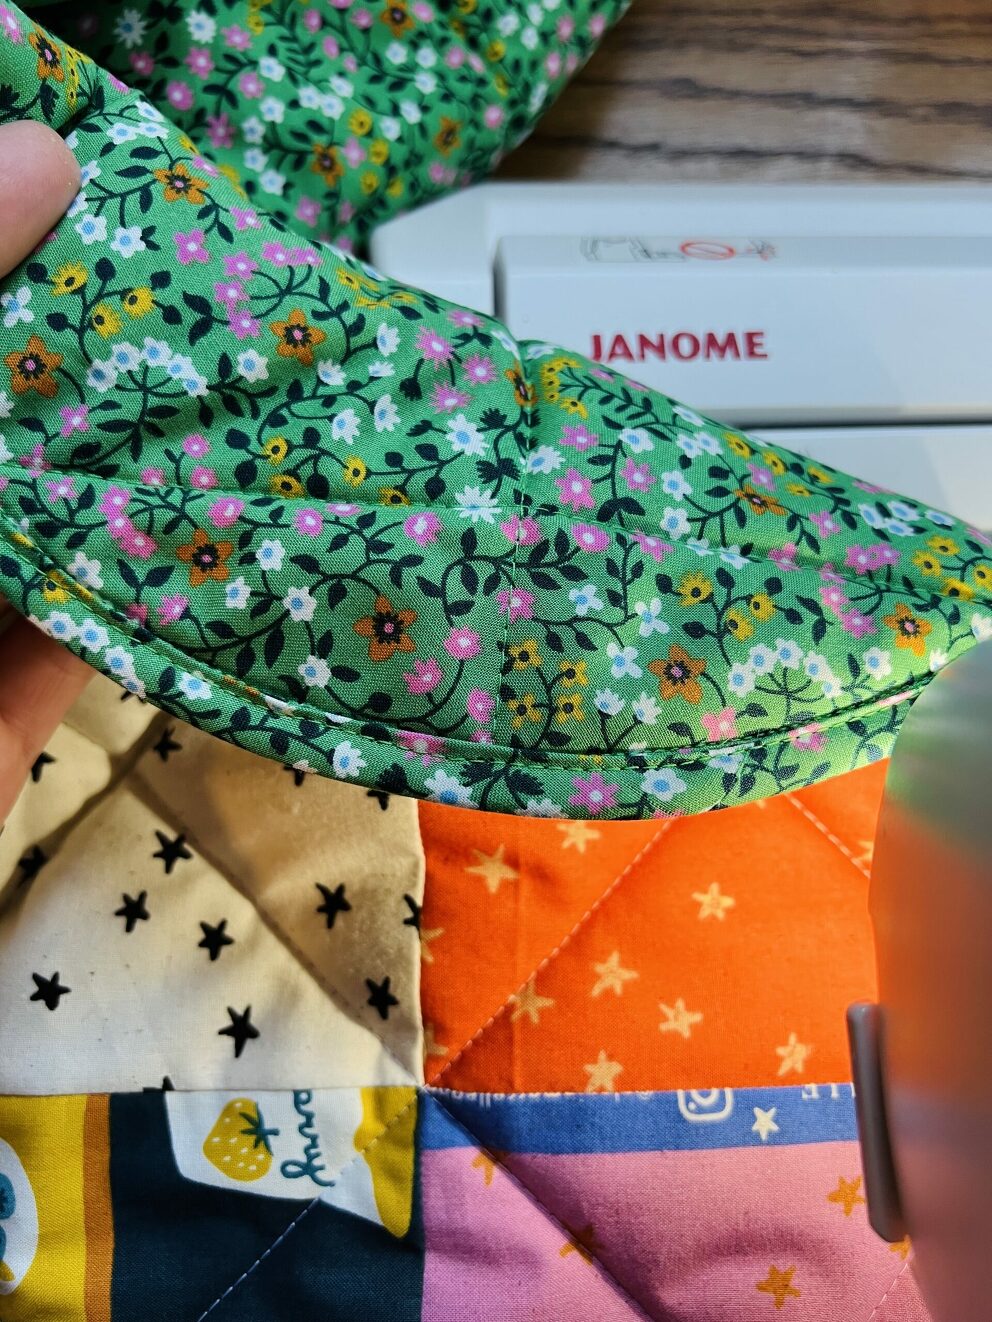 Kids Sleeping Bag : a Janome project : Olivia Jane Handcrafted - Blog